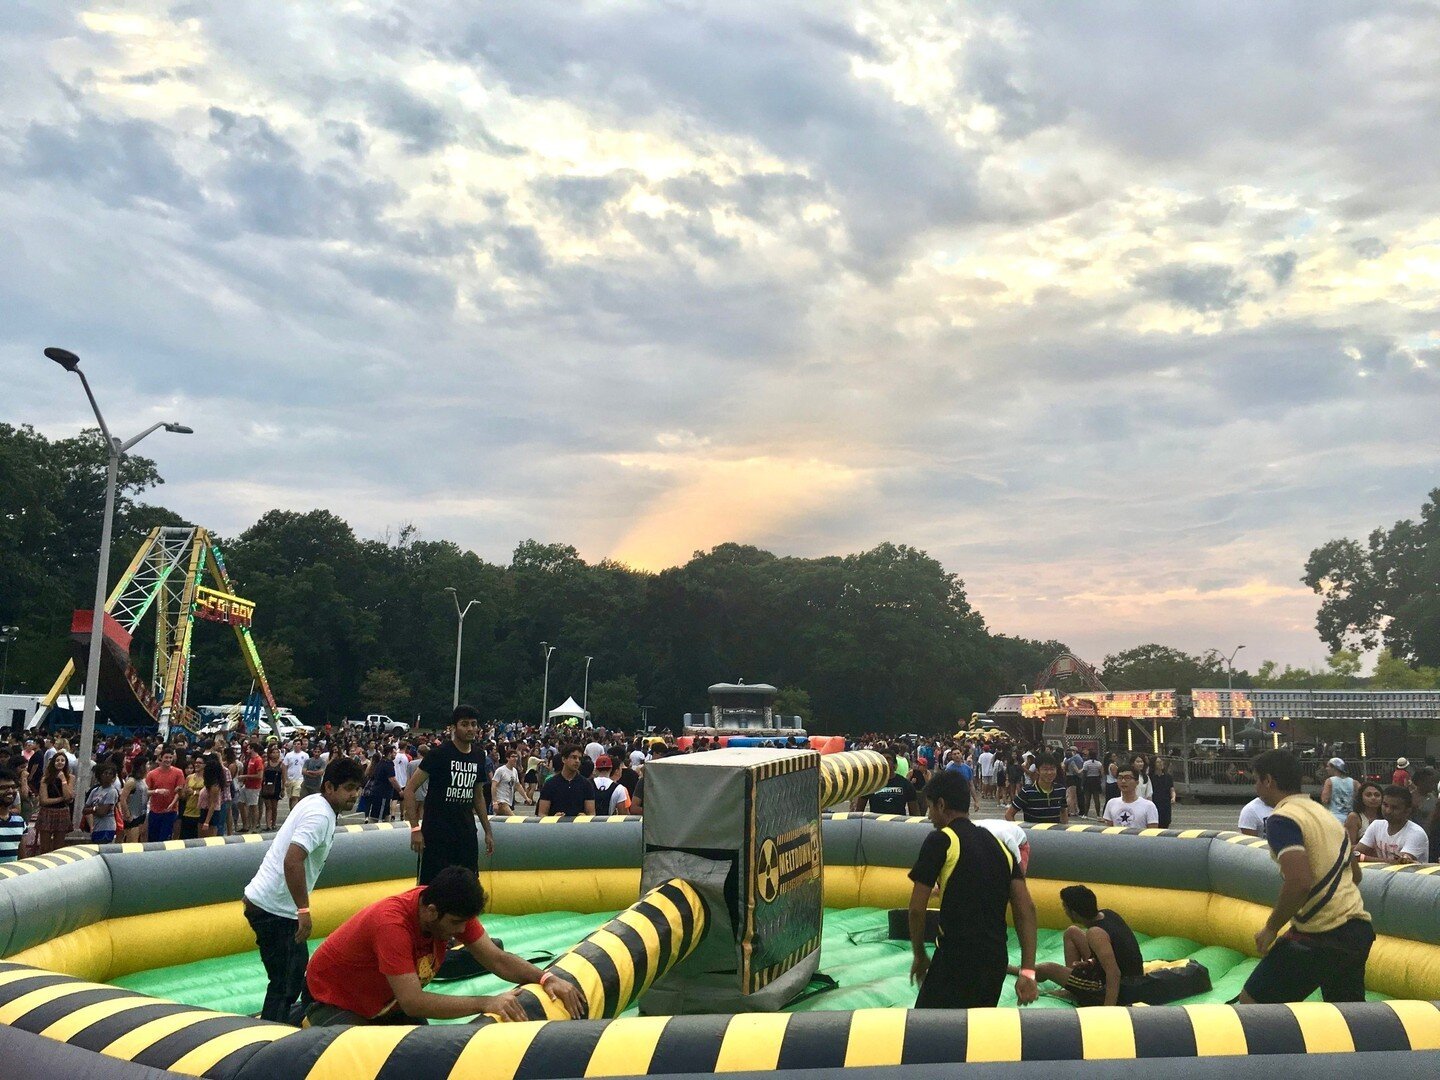 Inflatables are exciting elements to add to any spring carnival or festival ☀️⁠
⁠
We offer various inflatables for kids of all ages to enjoy, including favorites like Combo Slide, Military Rush, and Meltdown.⁠
⁠
⁠Contact us via the link in bio to che